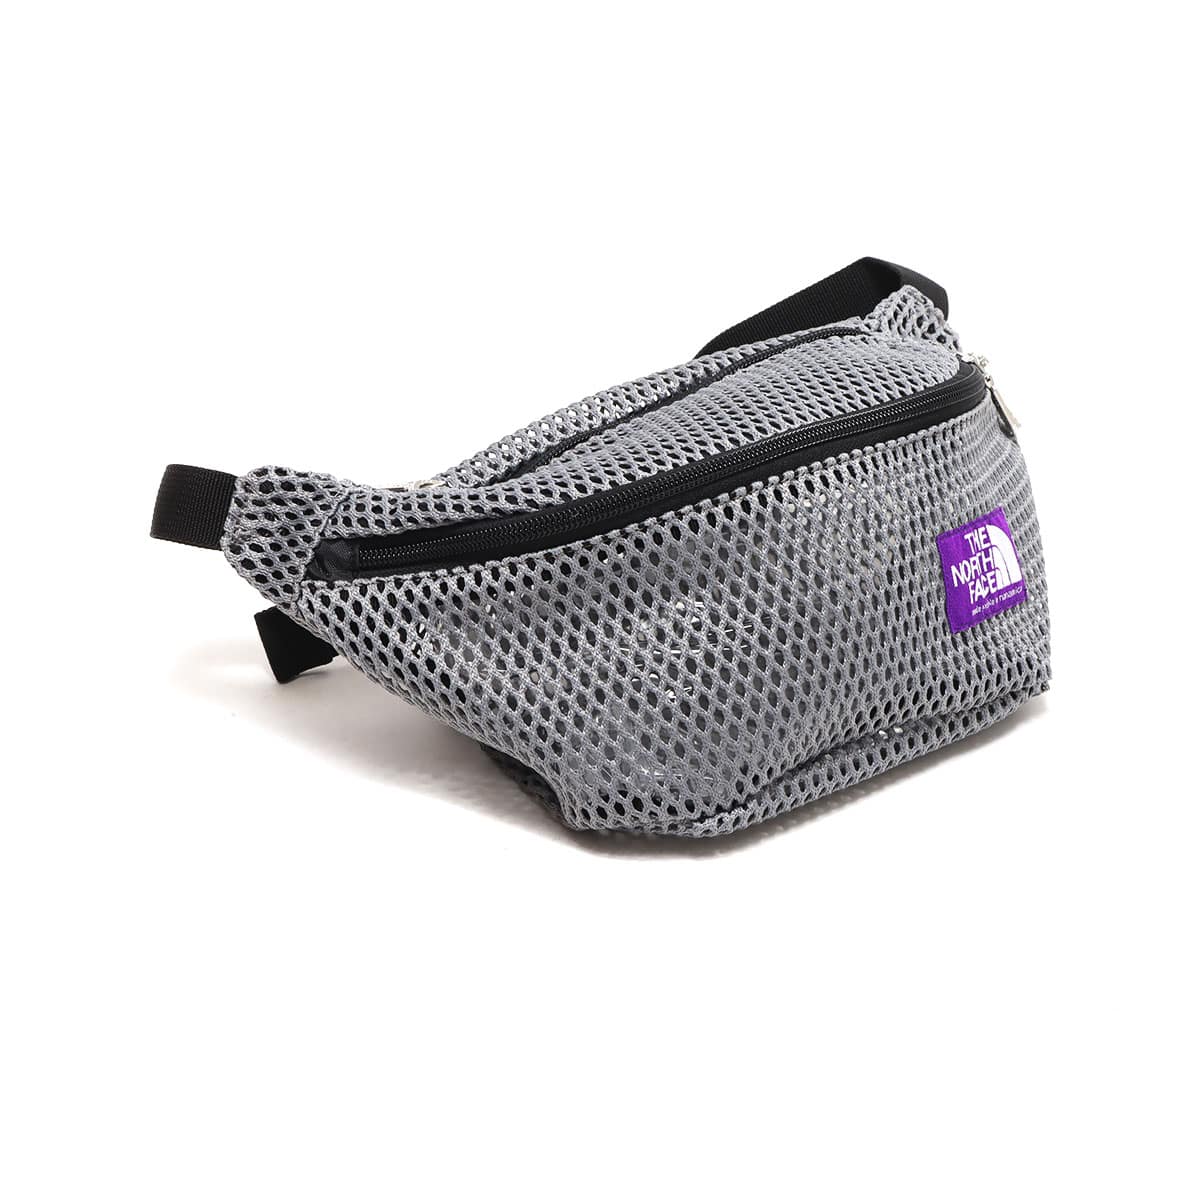 THE NORTH FACE PURPLE LABEL MESH WAIST BAG Silver Gray 22SS-I